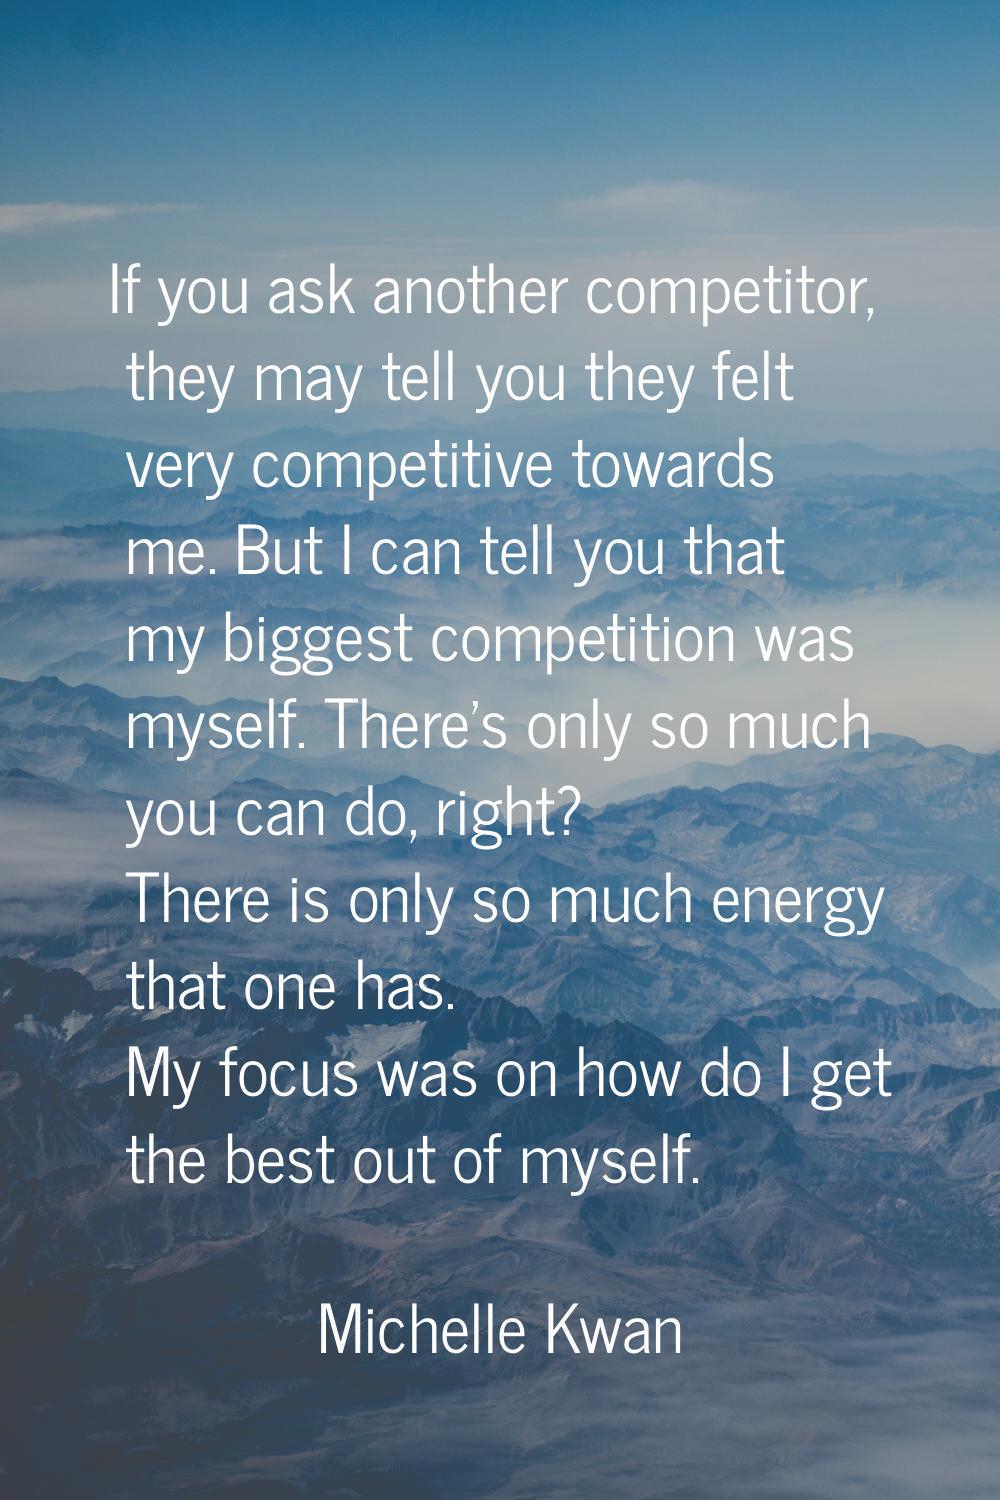 If you ask another competitor, they may tell you they felt very competitive towards me. But I can t